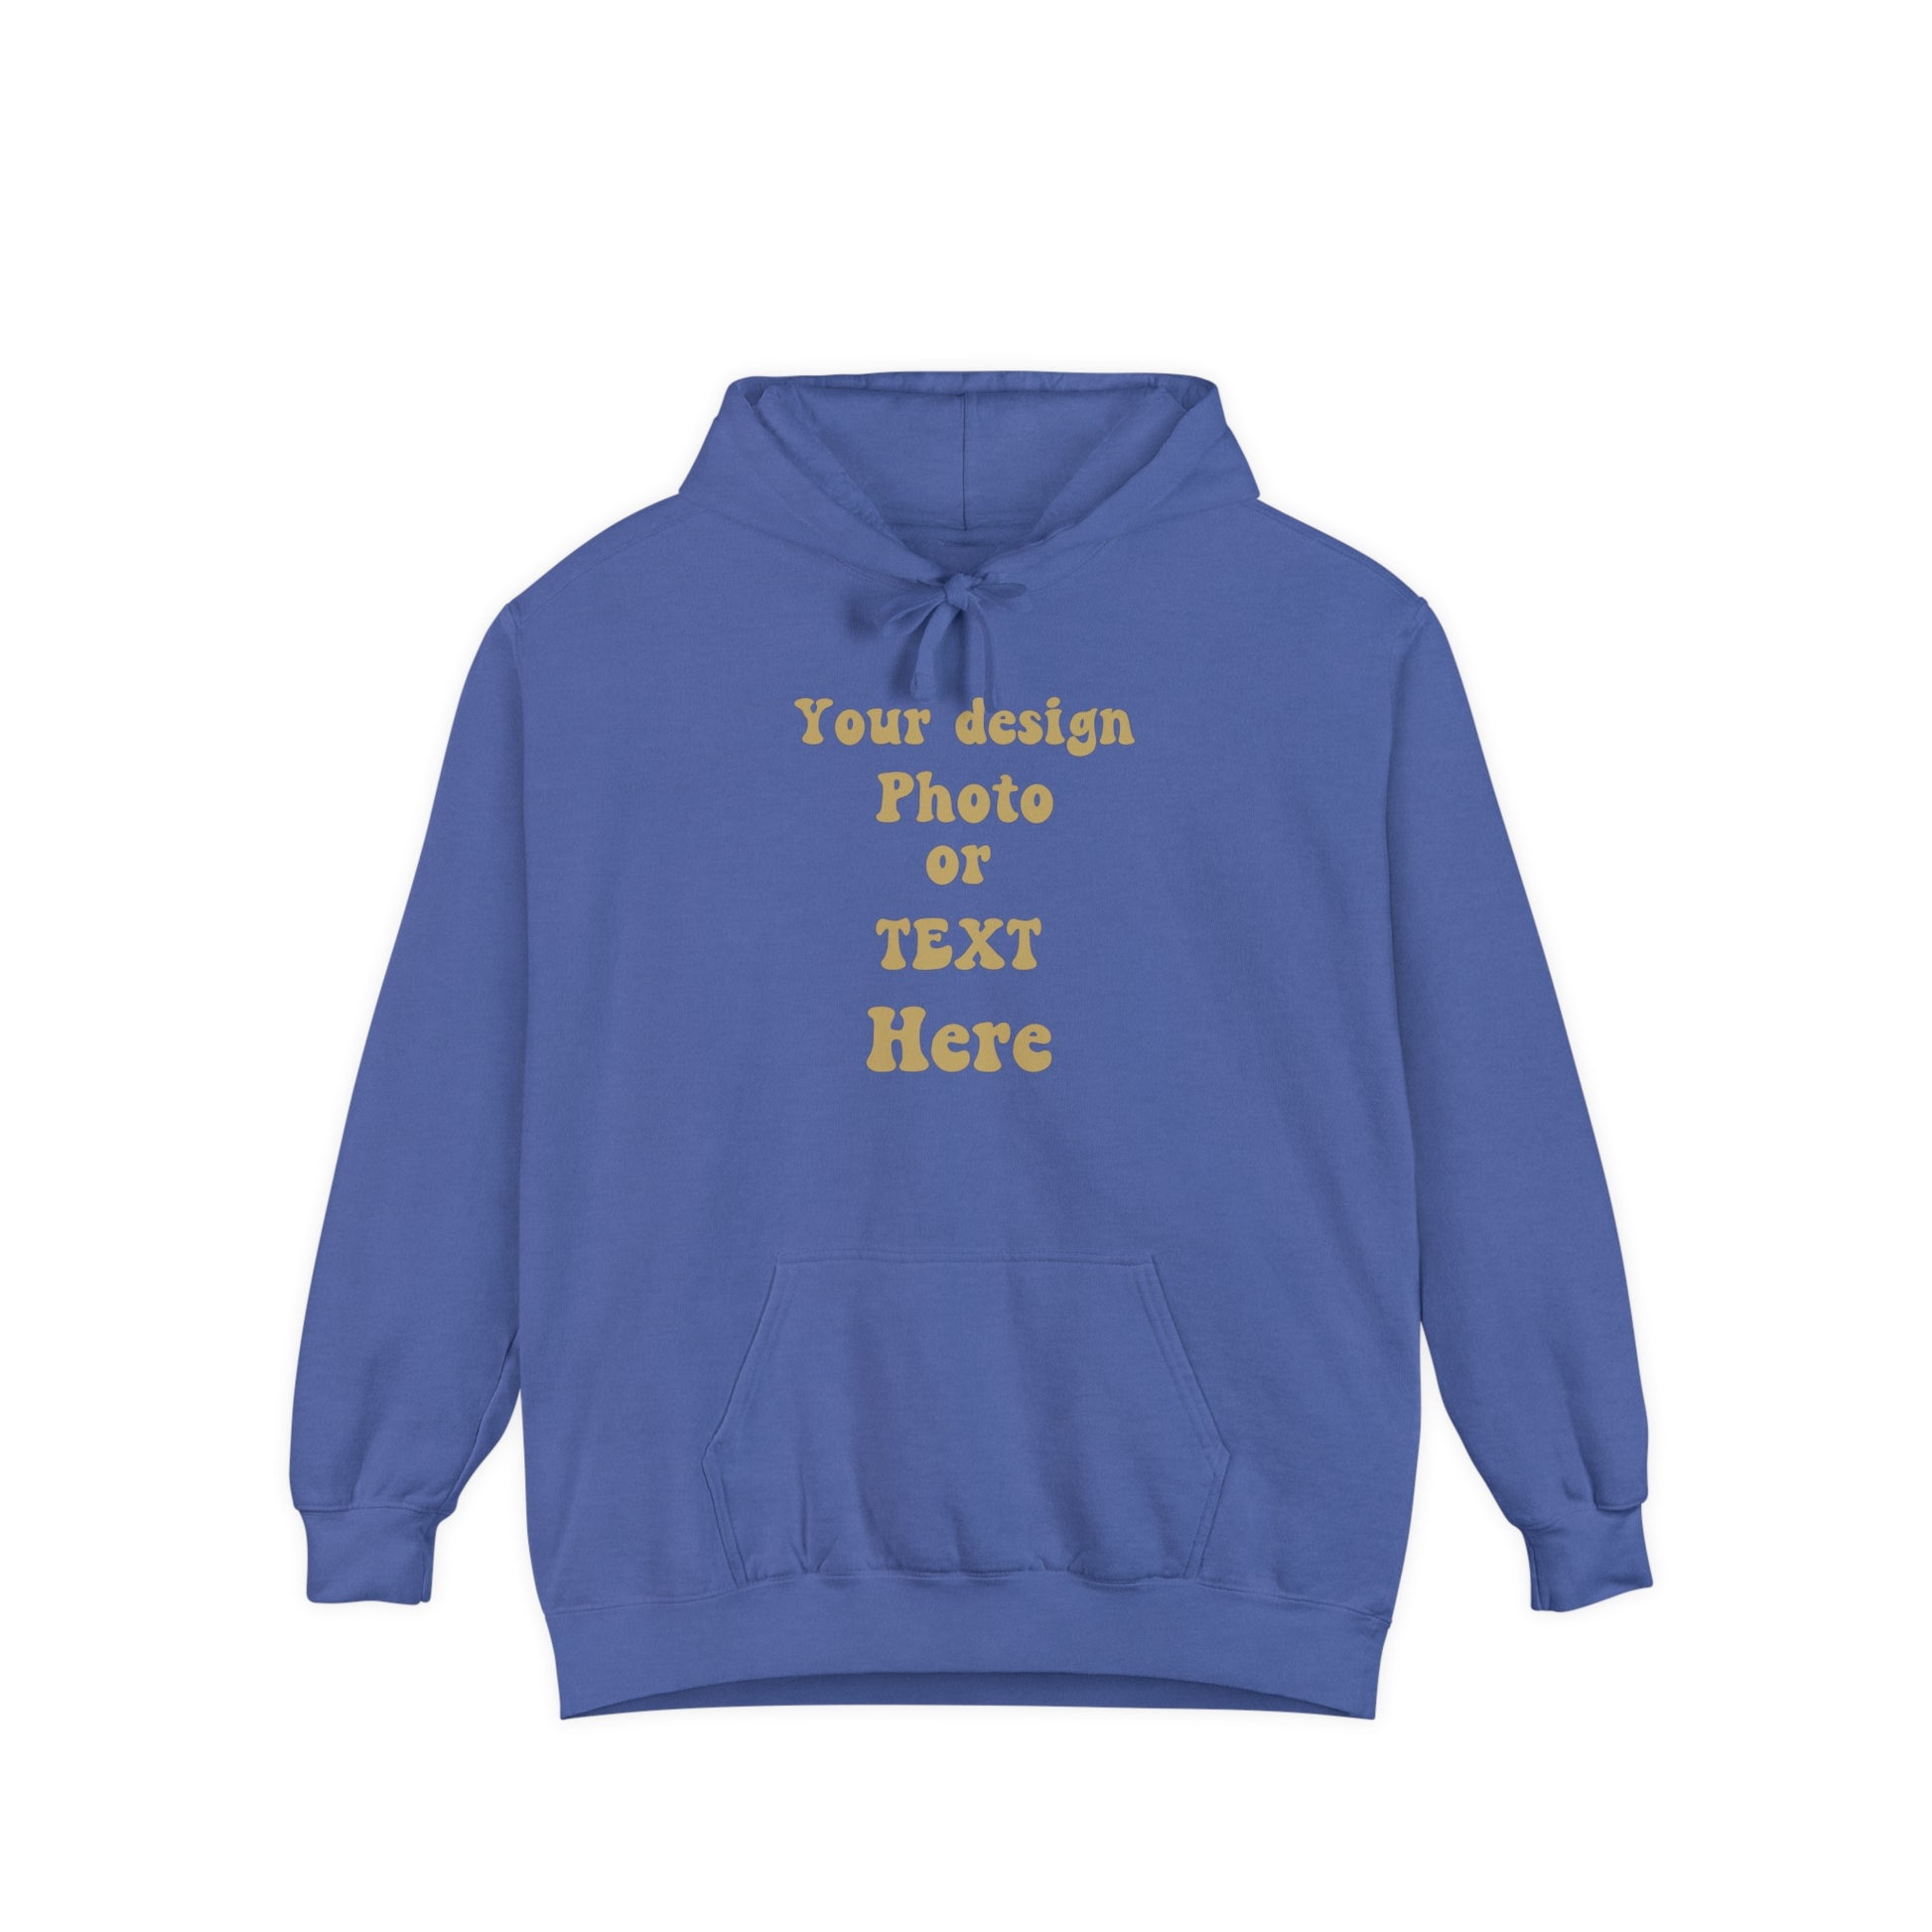 Luxury Hoodie - Personalize with Your Design, Photo, or Text | Greatest Comfort Hoodie Flo Blue S 